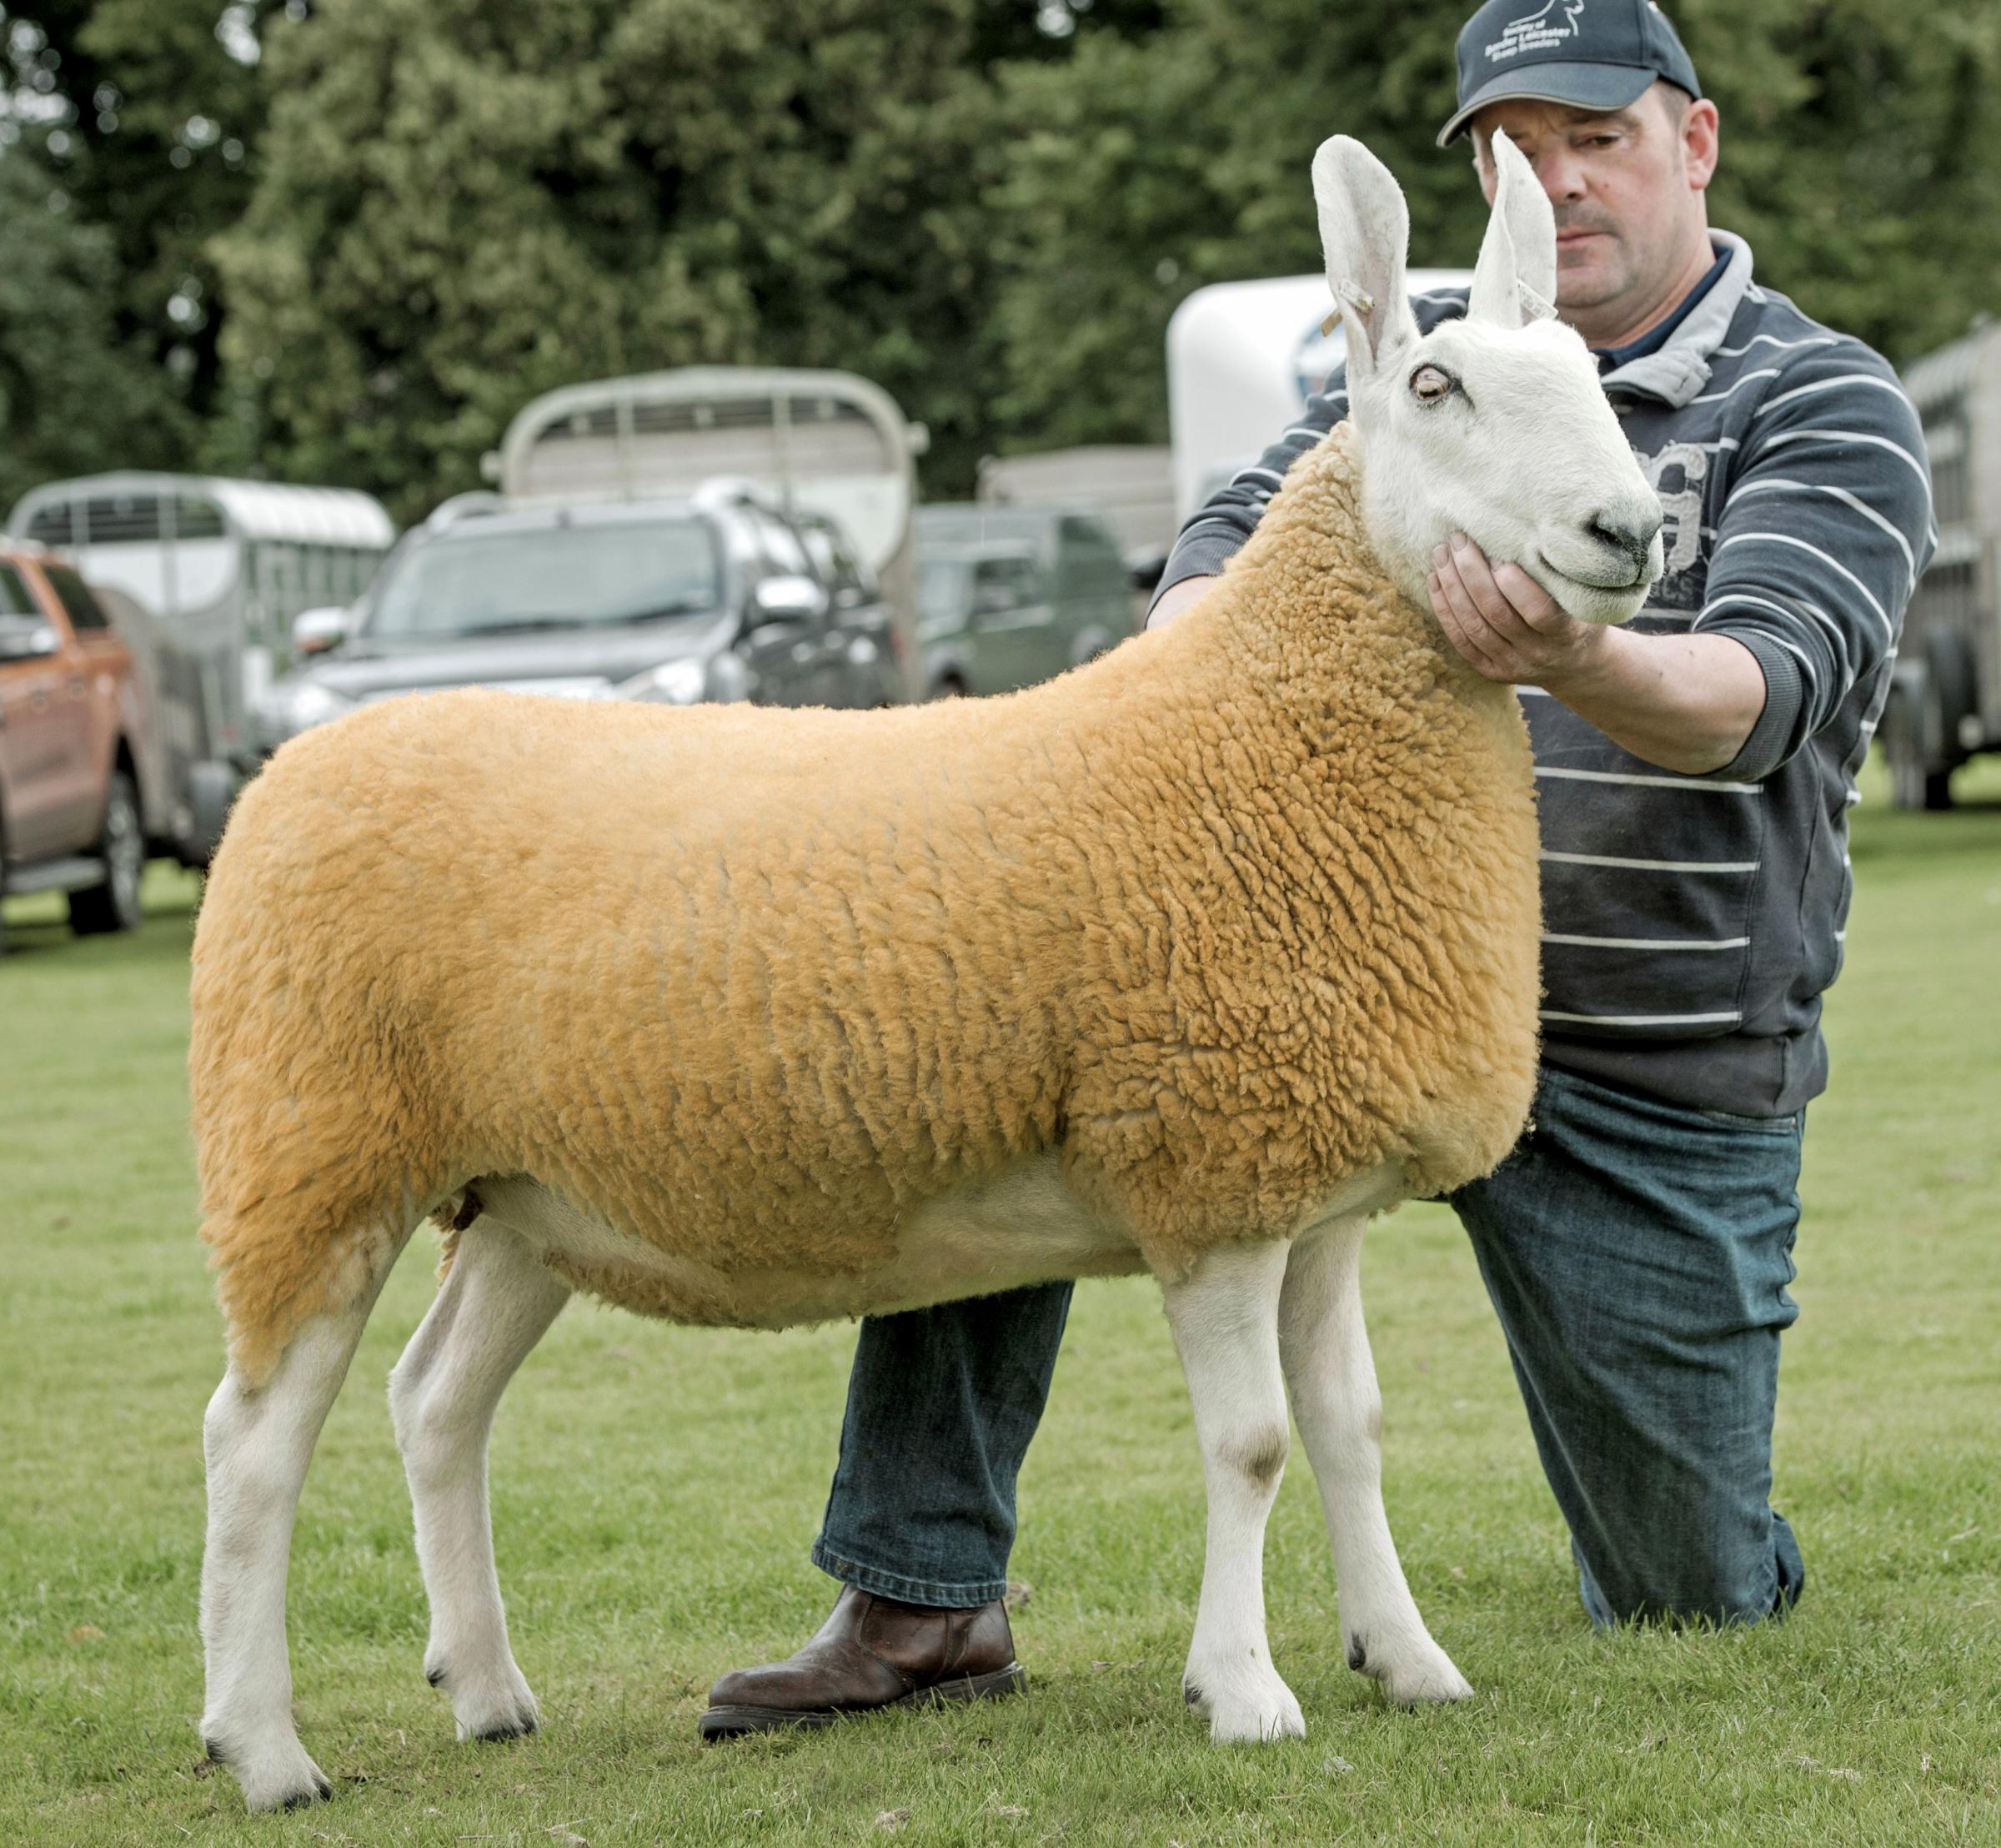 Euan Mill won the Border Leicesters